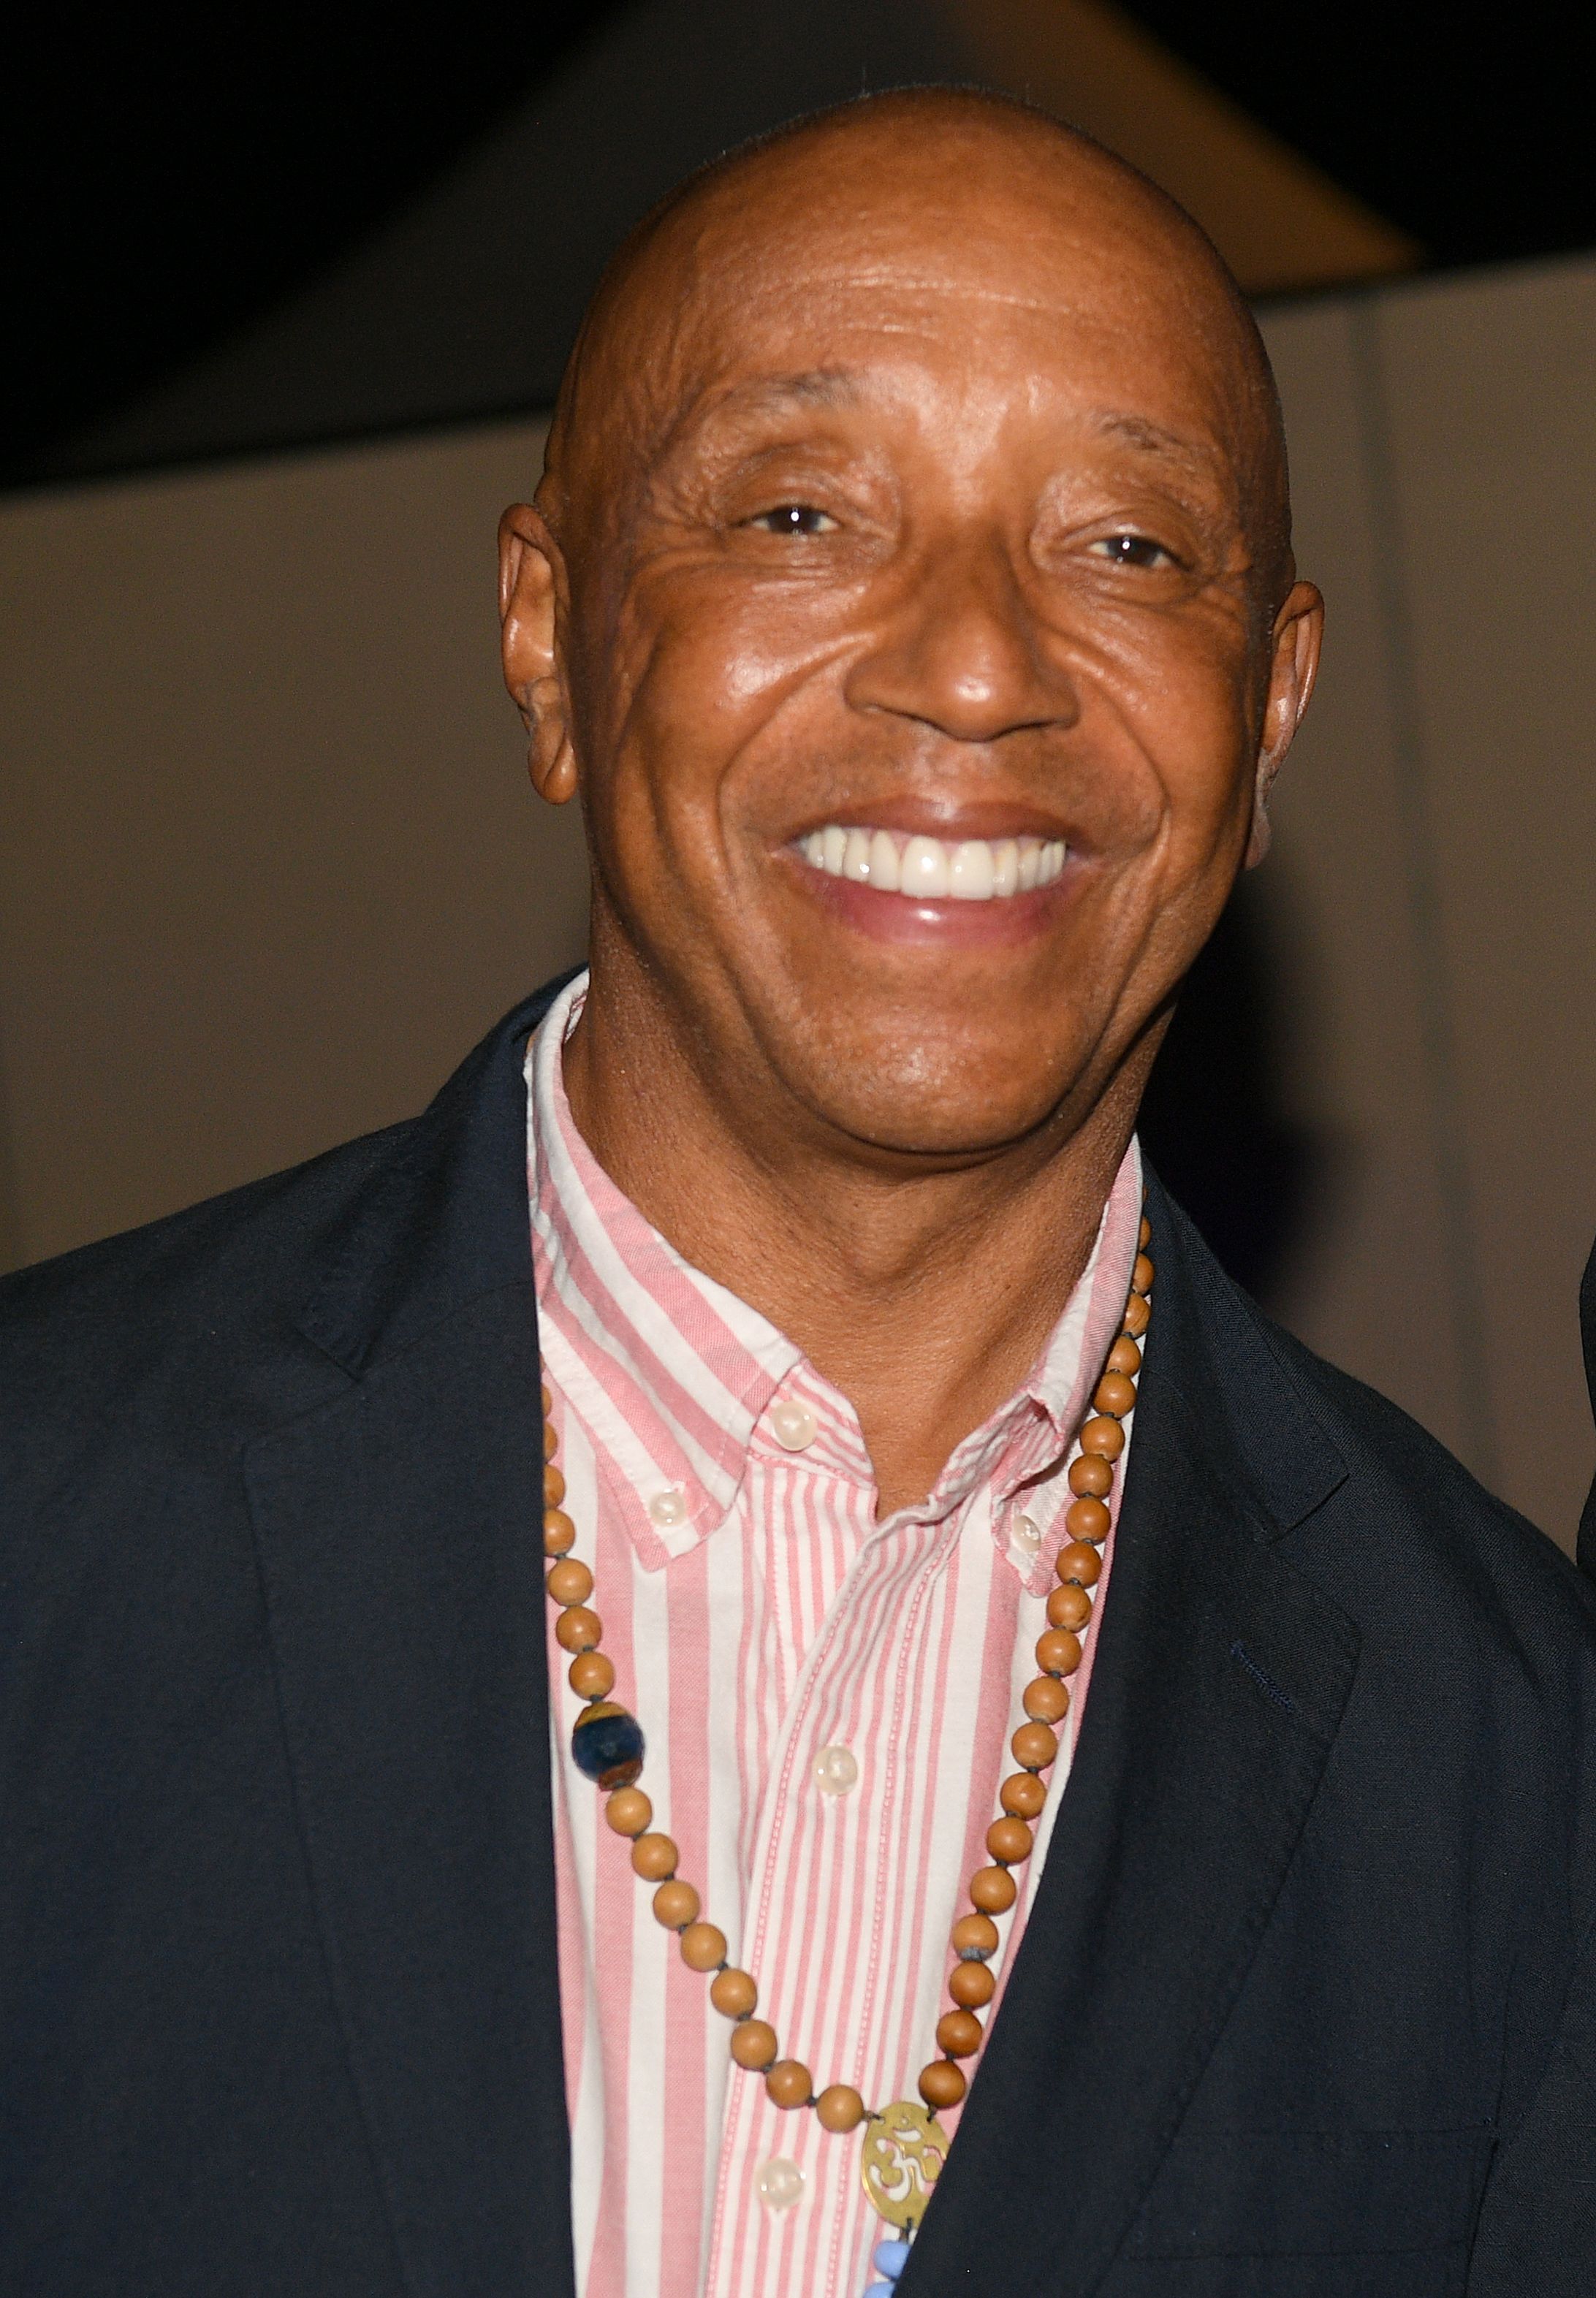 Russell Simmons Net Worth How Much Money Does He Make?